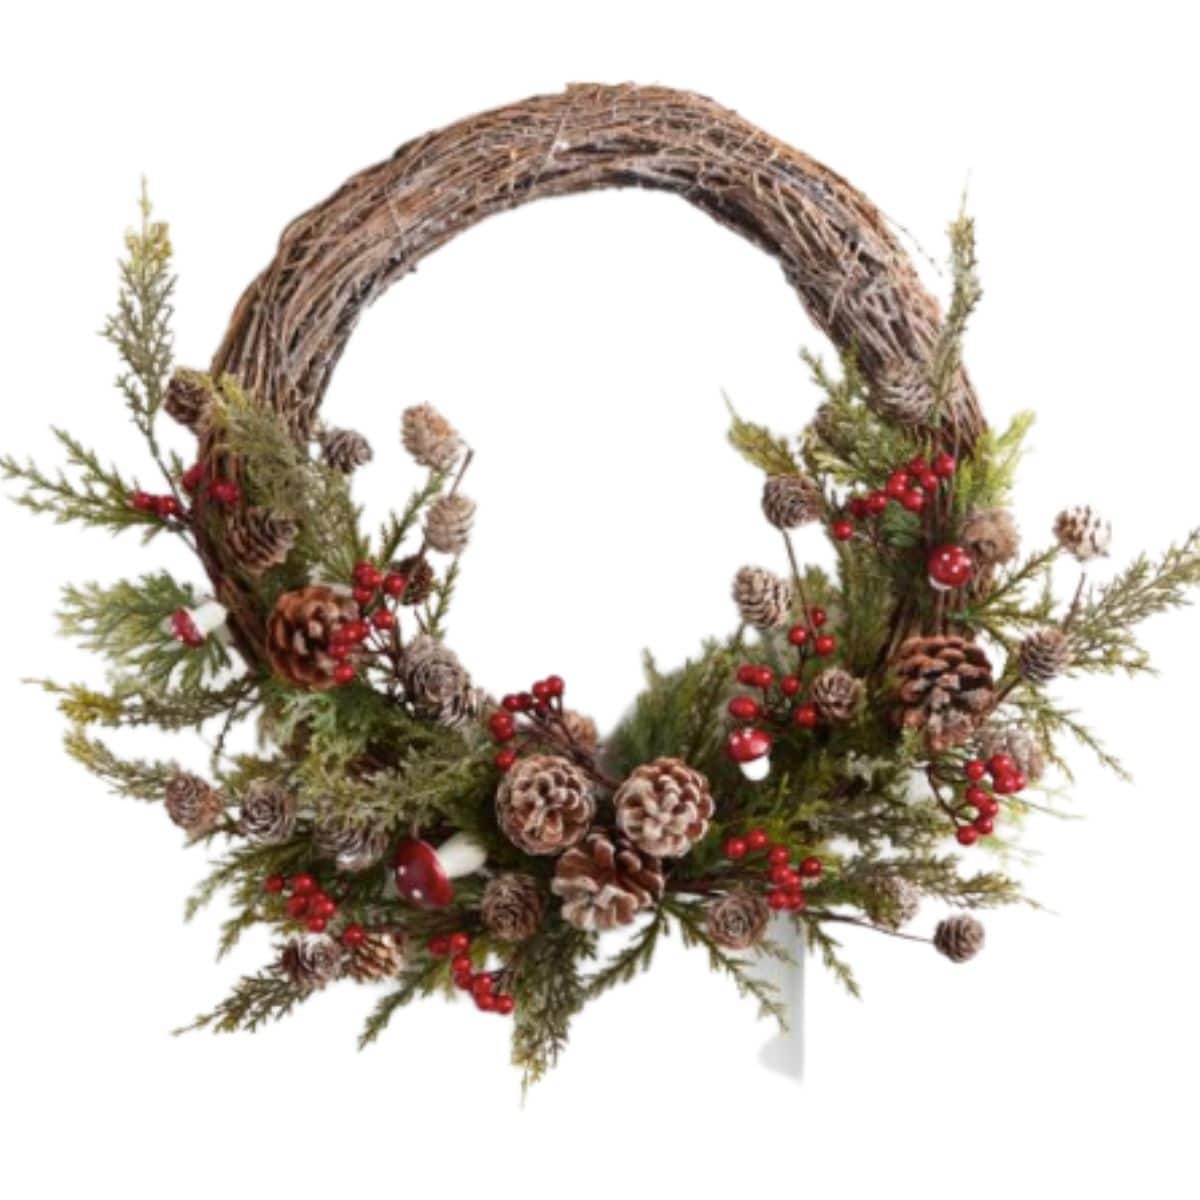 Faux Mushrooms & Berry Wreath with asymmetrical silhouette from world market